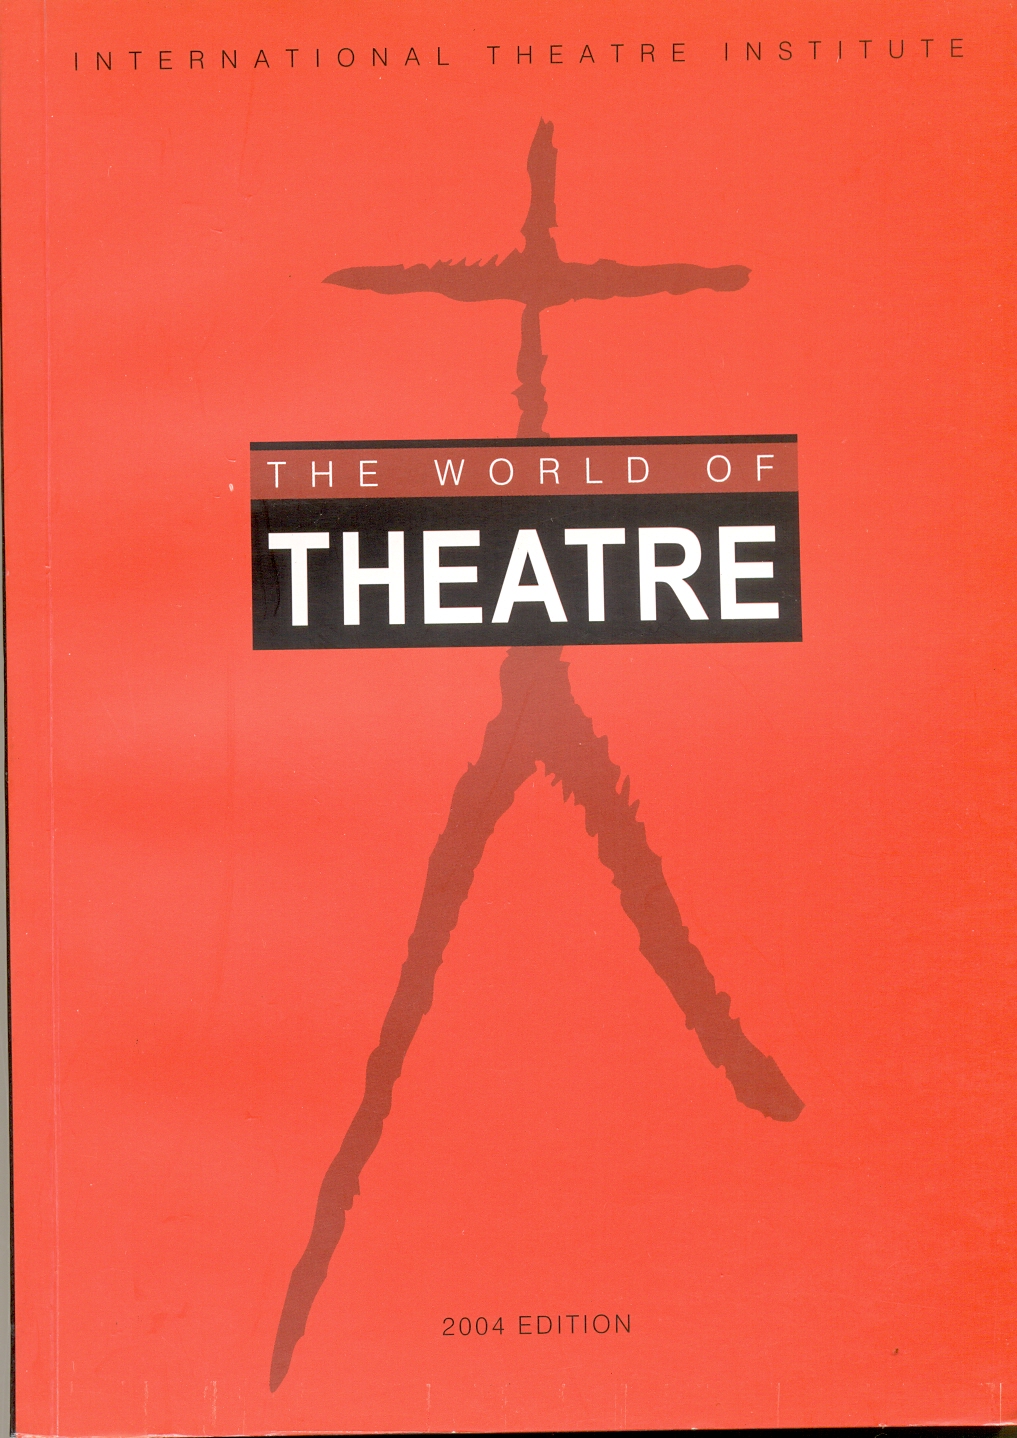 The World of Theatre 2004 Edition Image